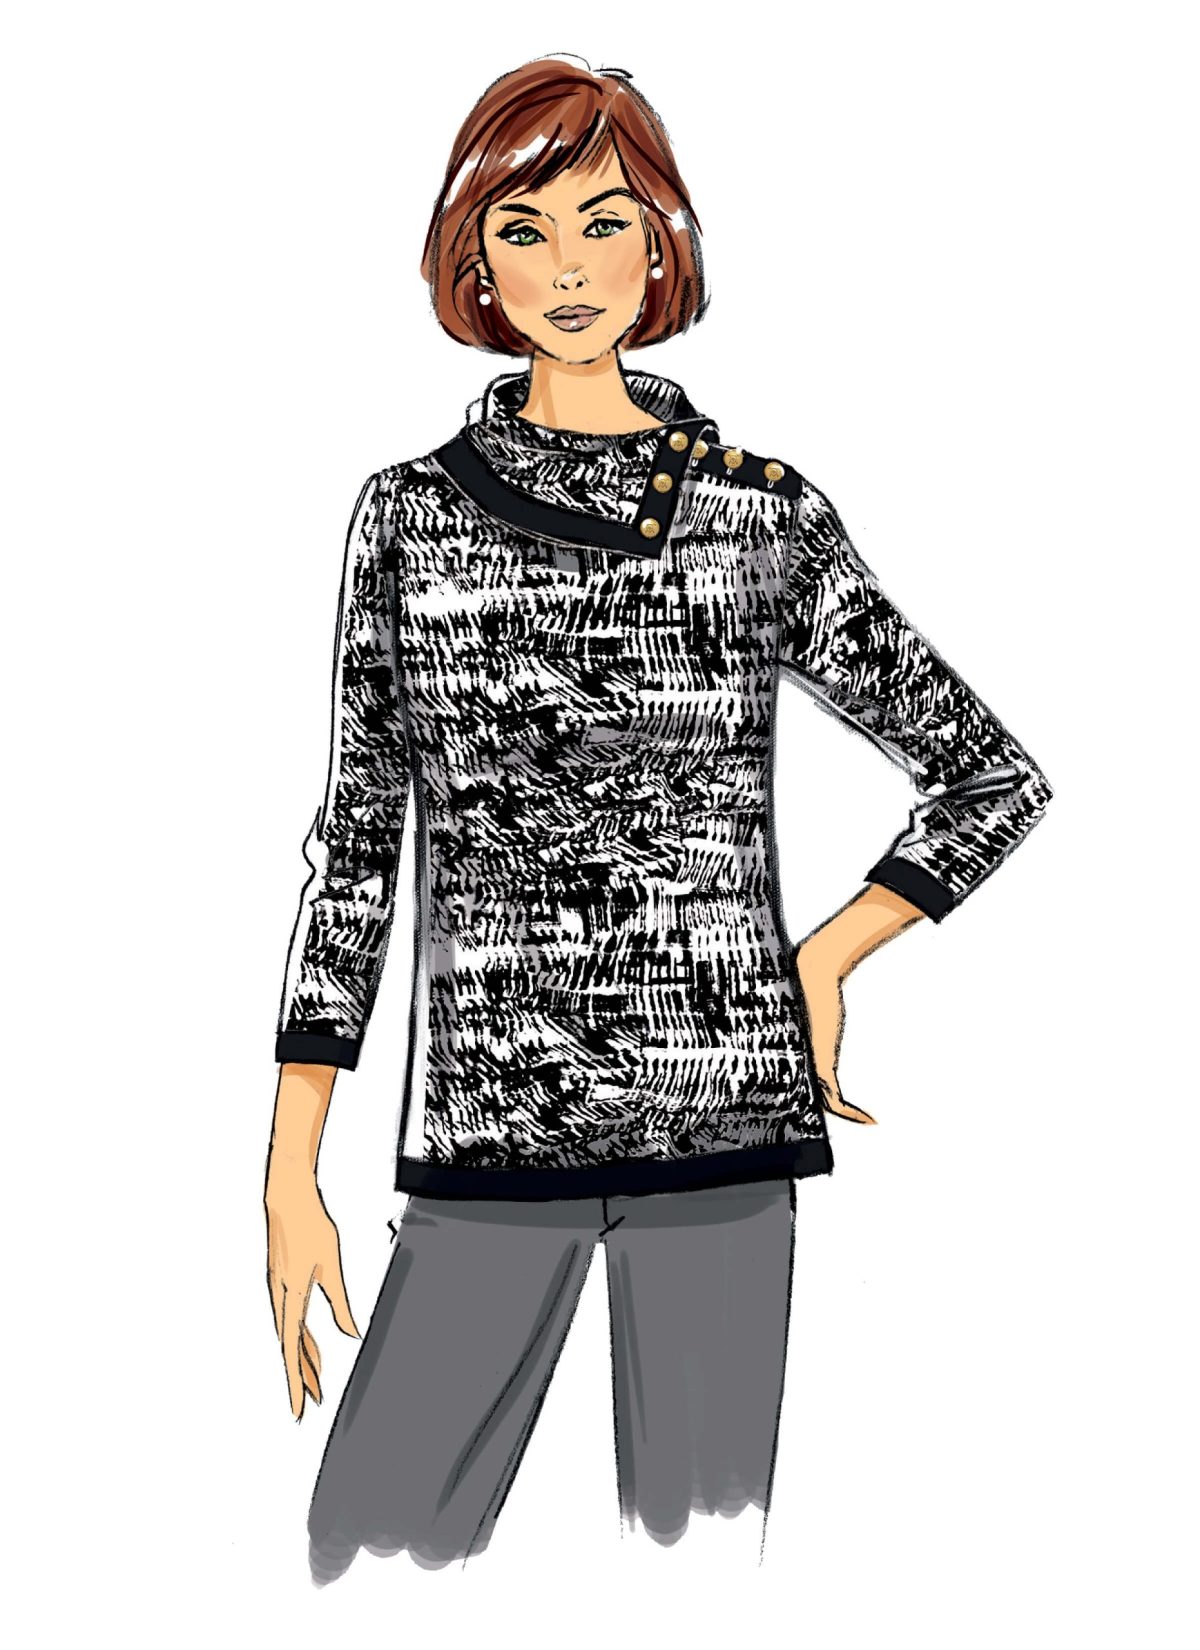 Butterick Sewing Pattern B6857 Misses' Top